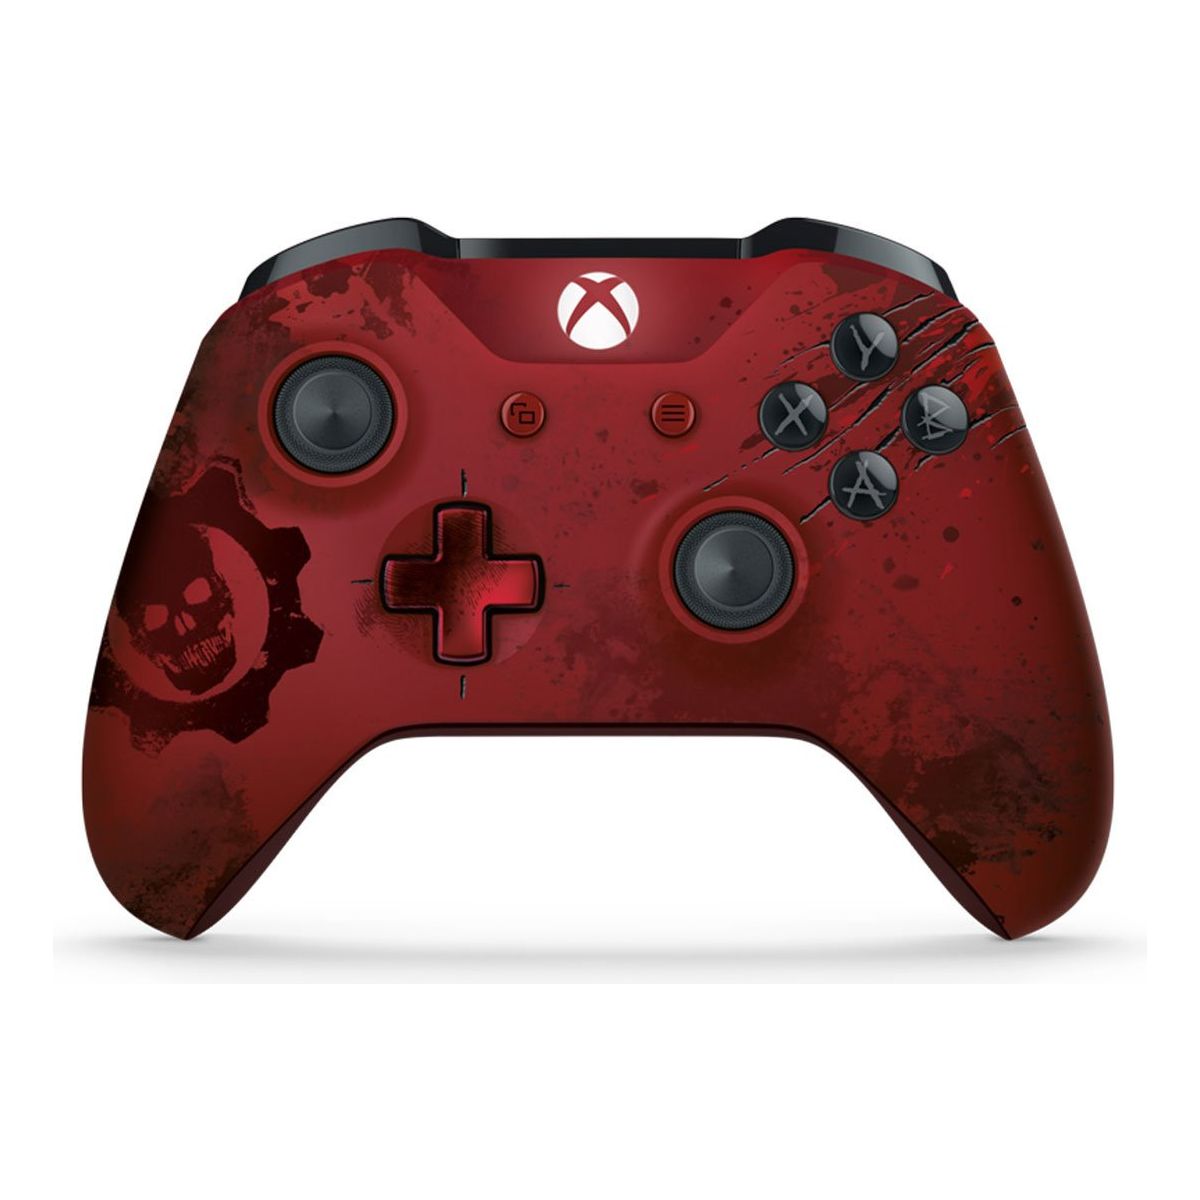 XBOX One Official Wireless Controller - Gears of War 4 Edition